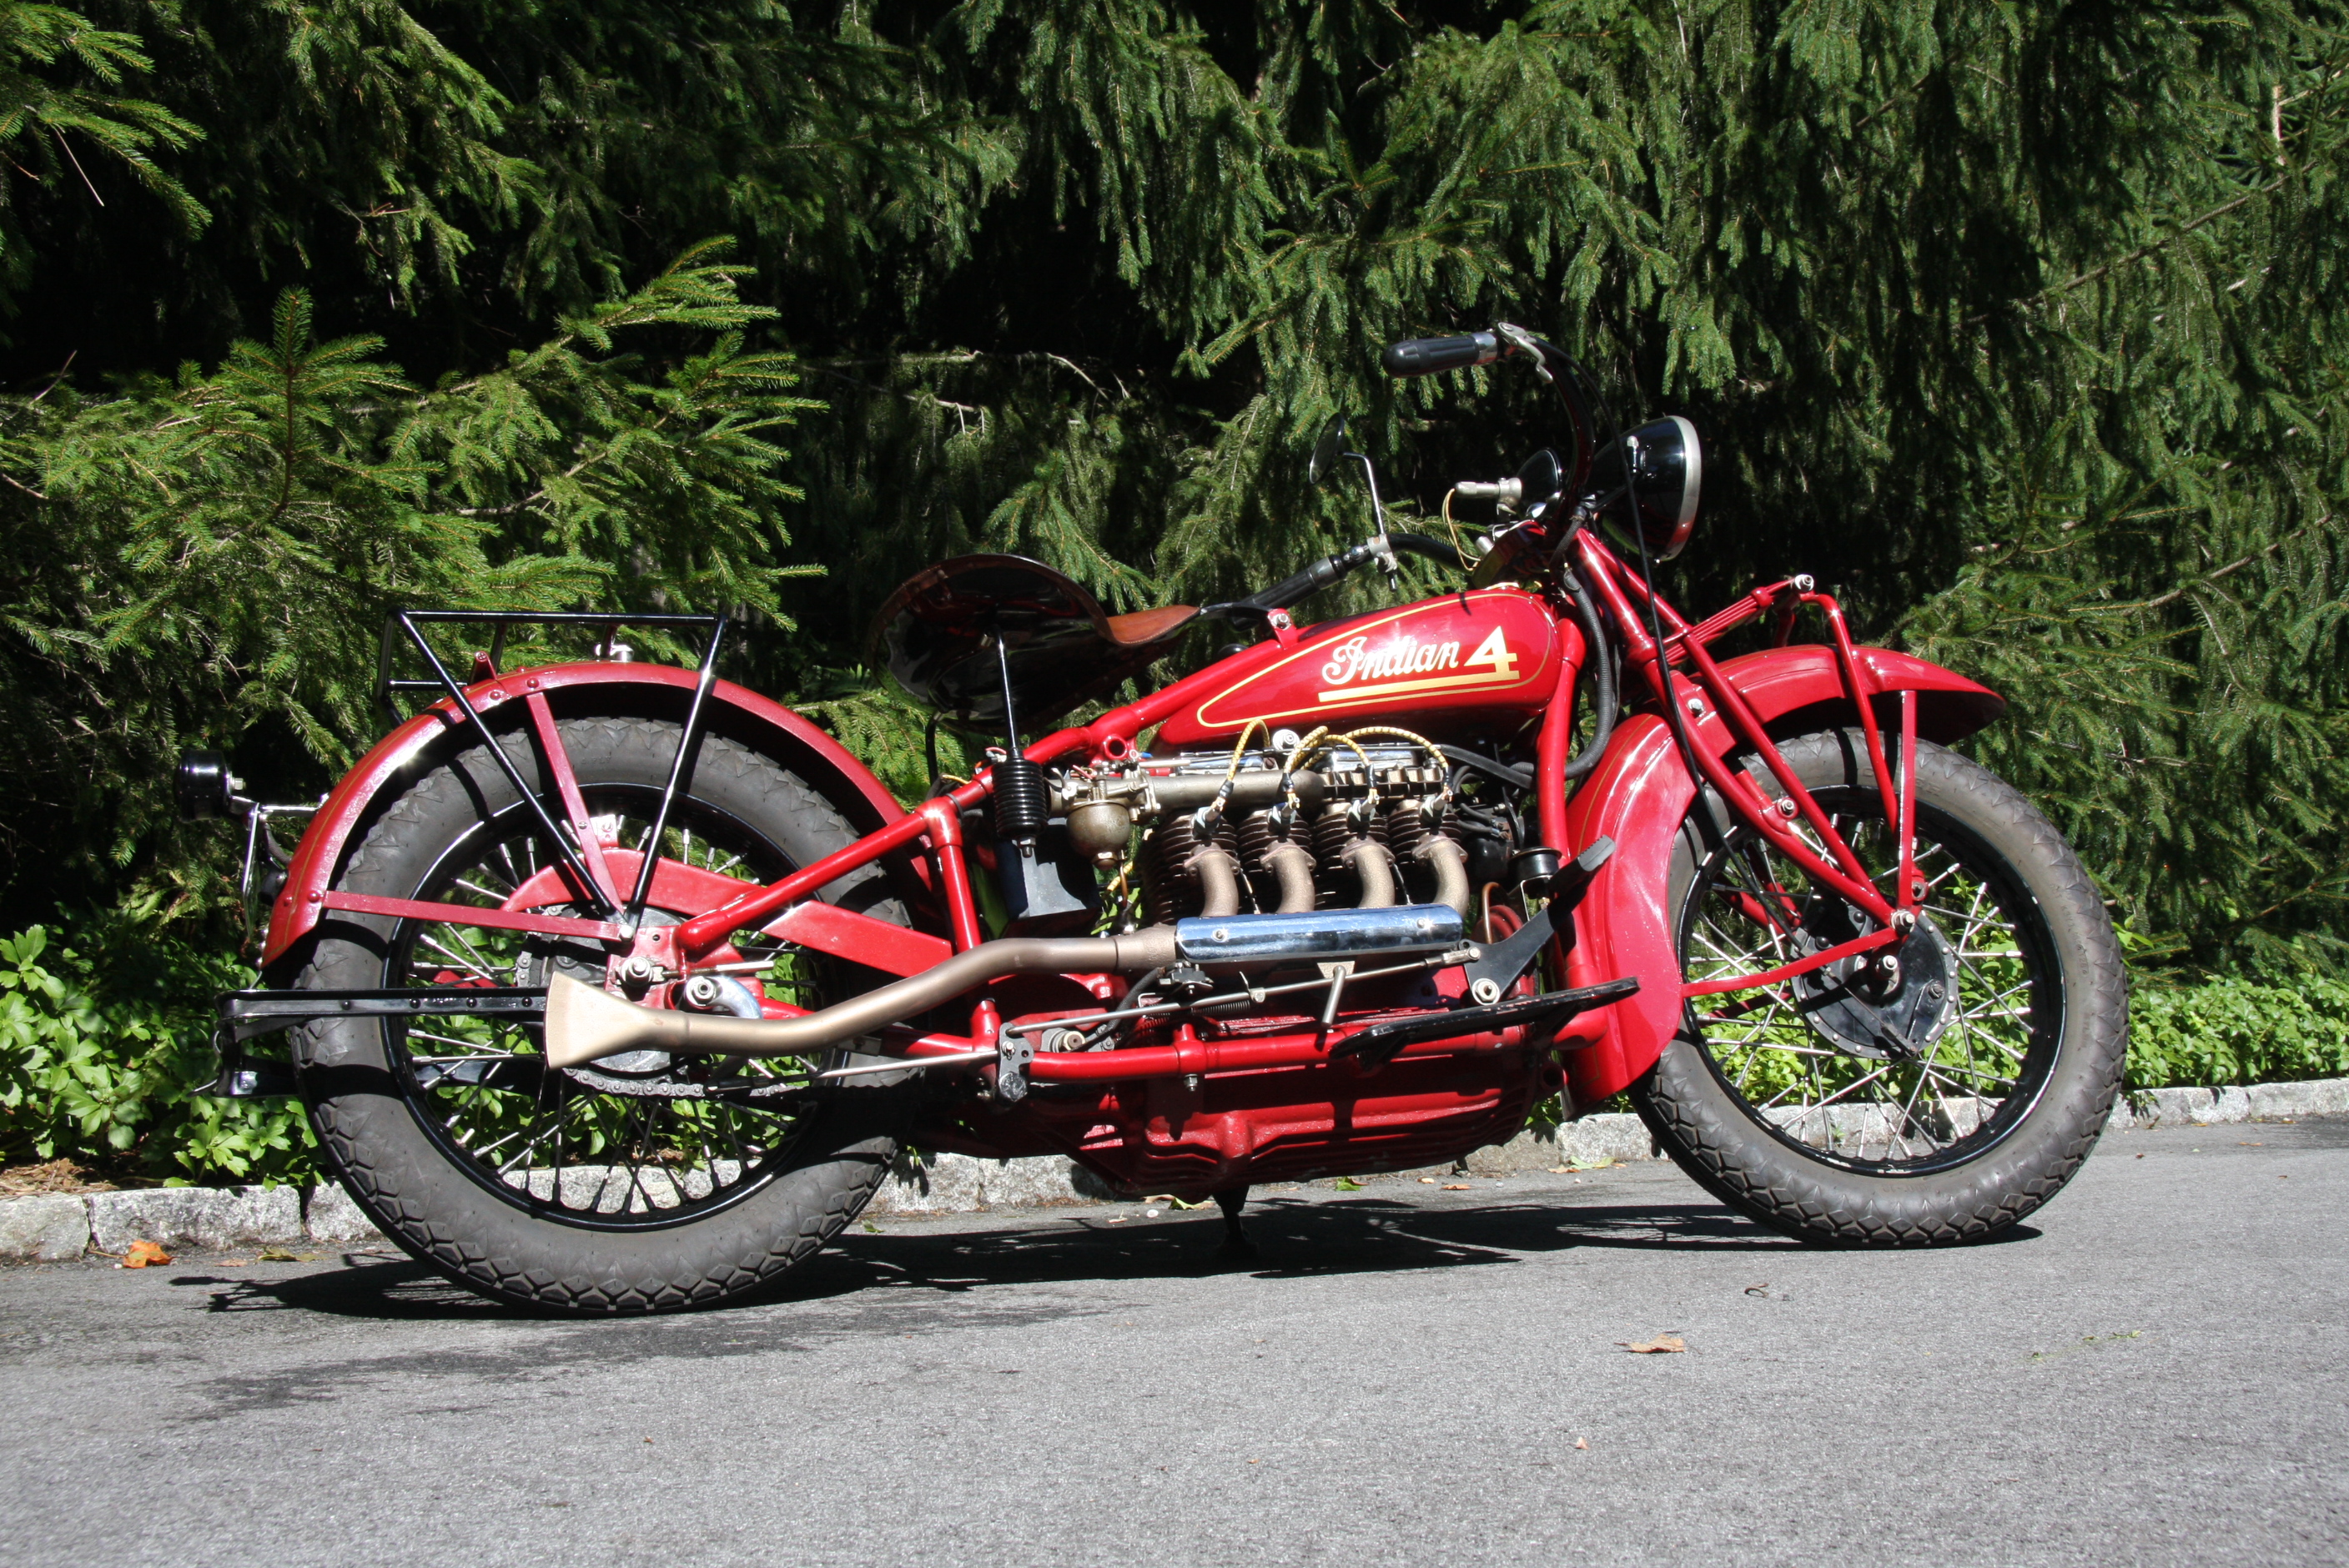 Classic 1930 Indian Four Motorcycle 